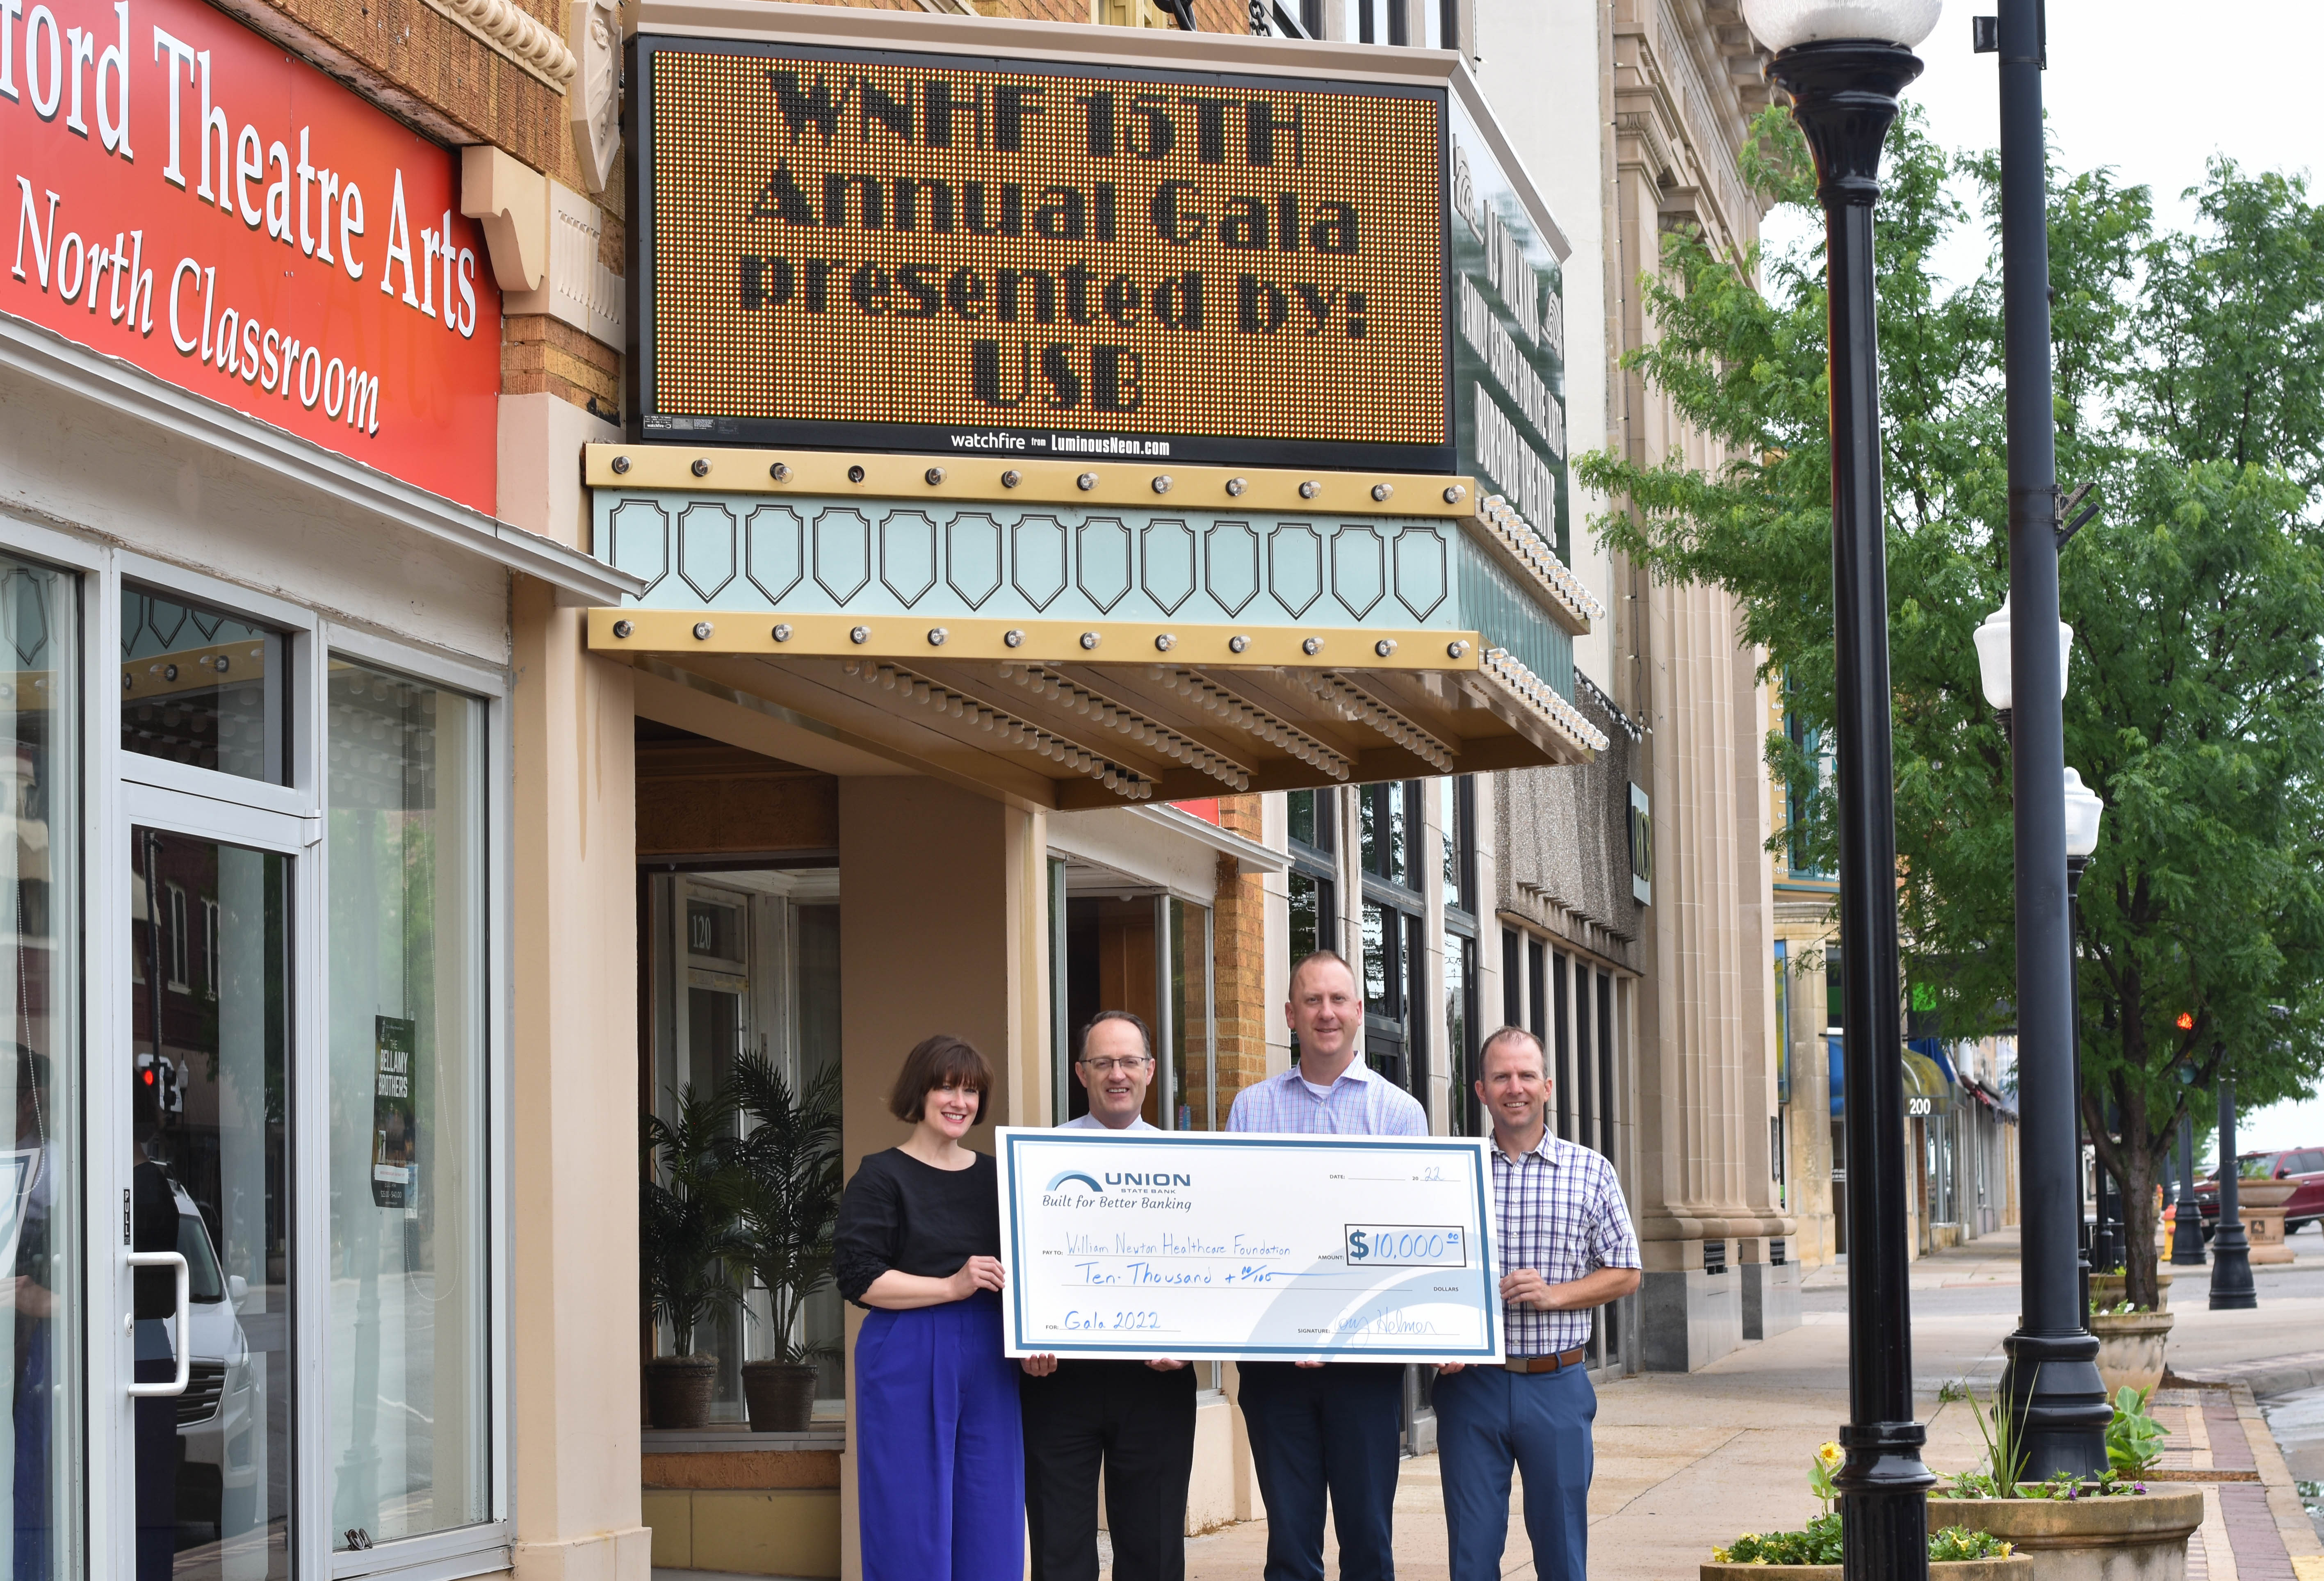 Standing in front of this year’s gala venue, the Burford Theatre, Union State Bank presents a check for the renewal of its annual sponsorship benefiting William Newton Healthcare Foundation. From left: William Newton Healthcare Foundation Director Annika Morris, William Newton Hospital Chief Executive Officer Ben Quinton, Union State Bank Winfield Market President Cory Helmer, and Union State Bank Vice President/Mortgage Lender Rusty Zimmerman.